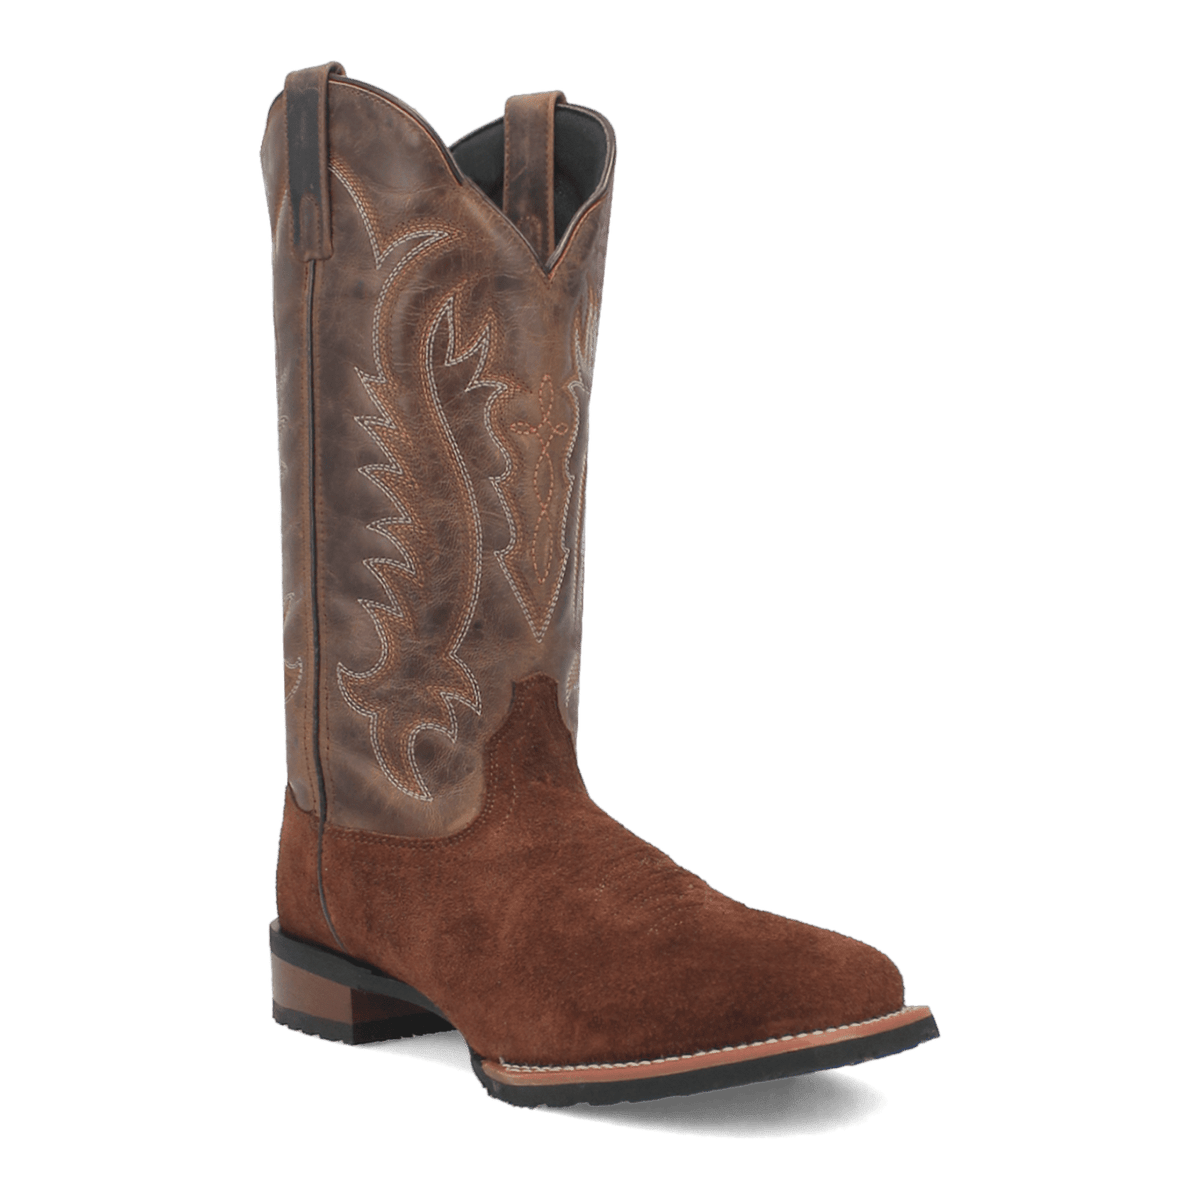 RIGID LEATHER BOOT Cover